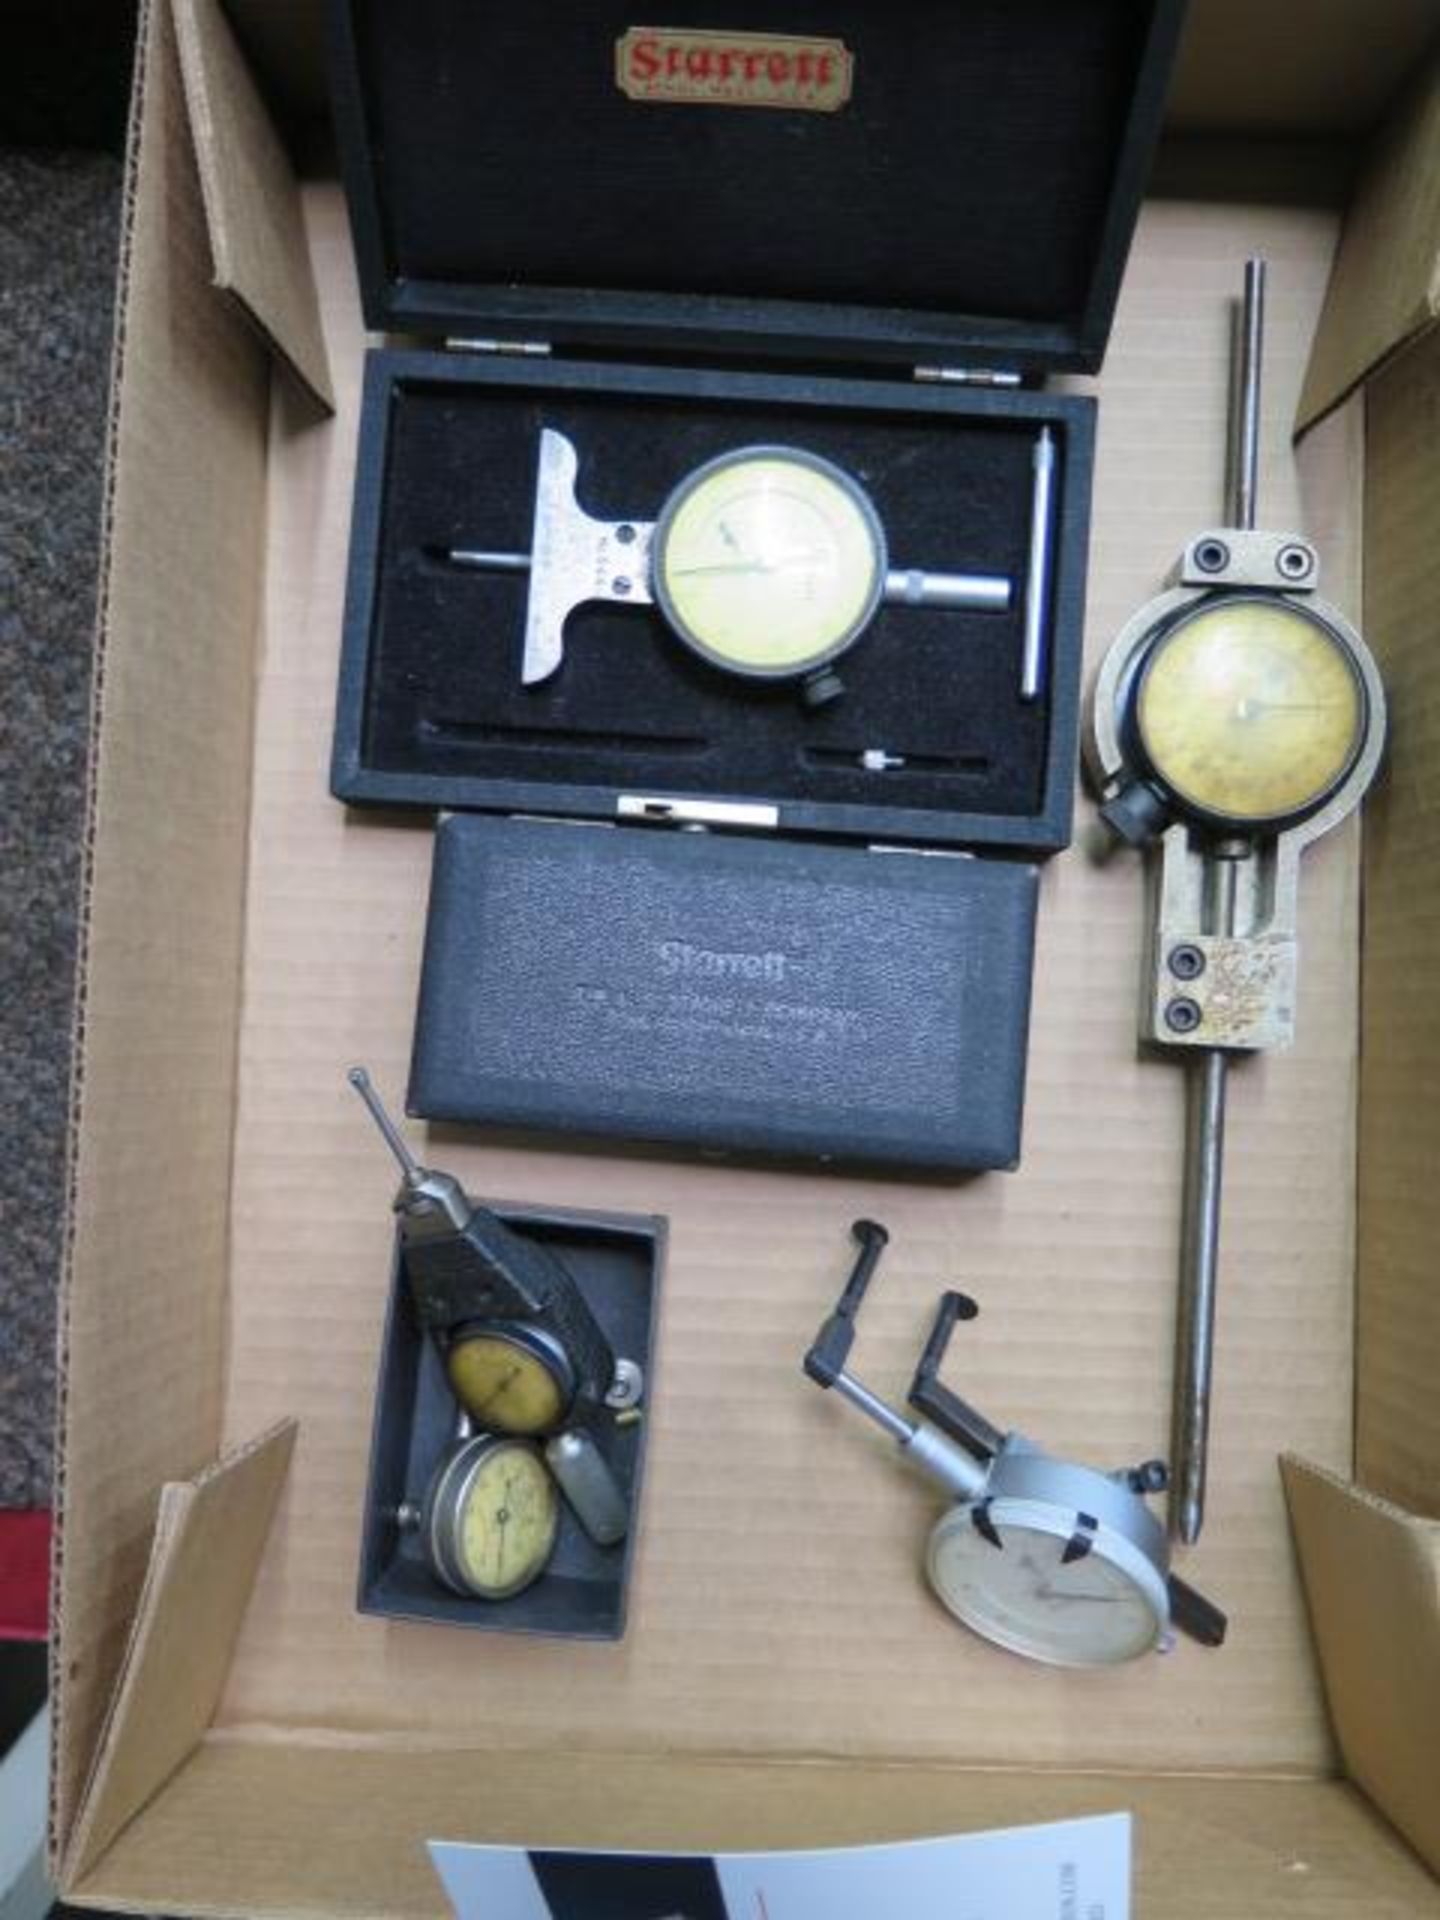 Starrett Dial Depth Gage, Starrett 0-1" Anvil Mic and Misc Indicators (SOLD AS-IS - NO WARRANTY) - Image 2 of 4